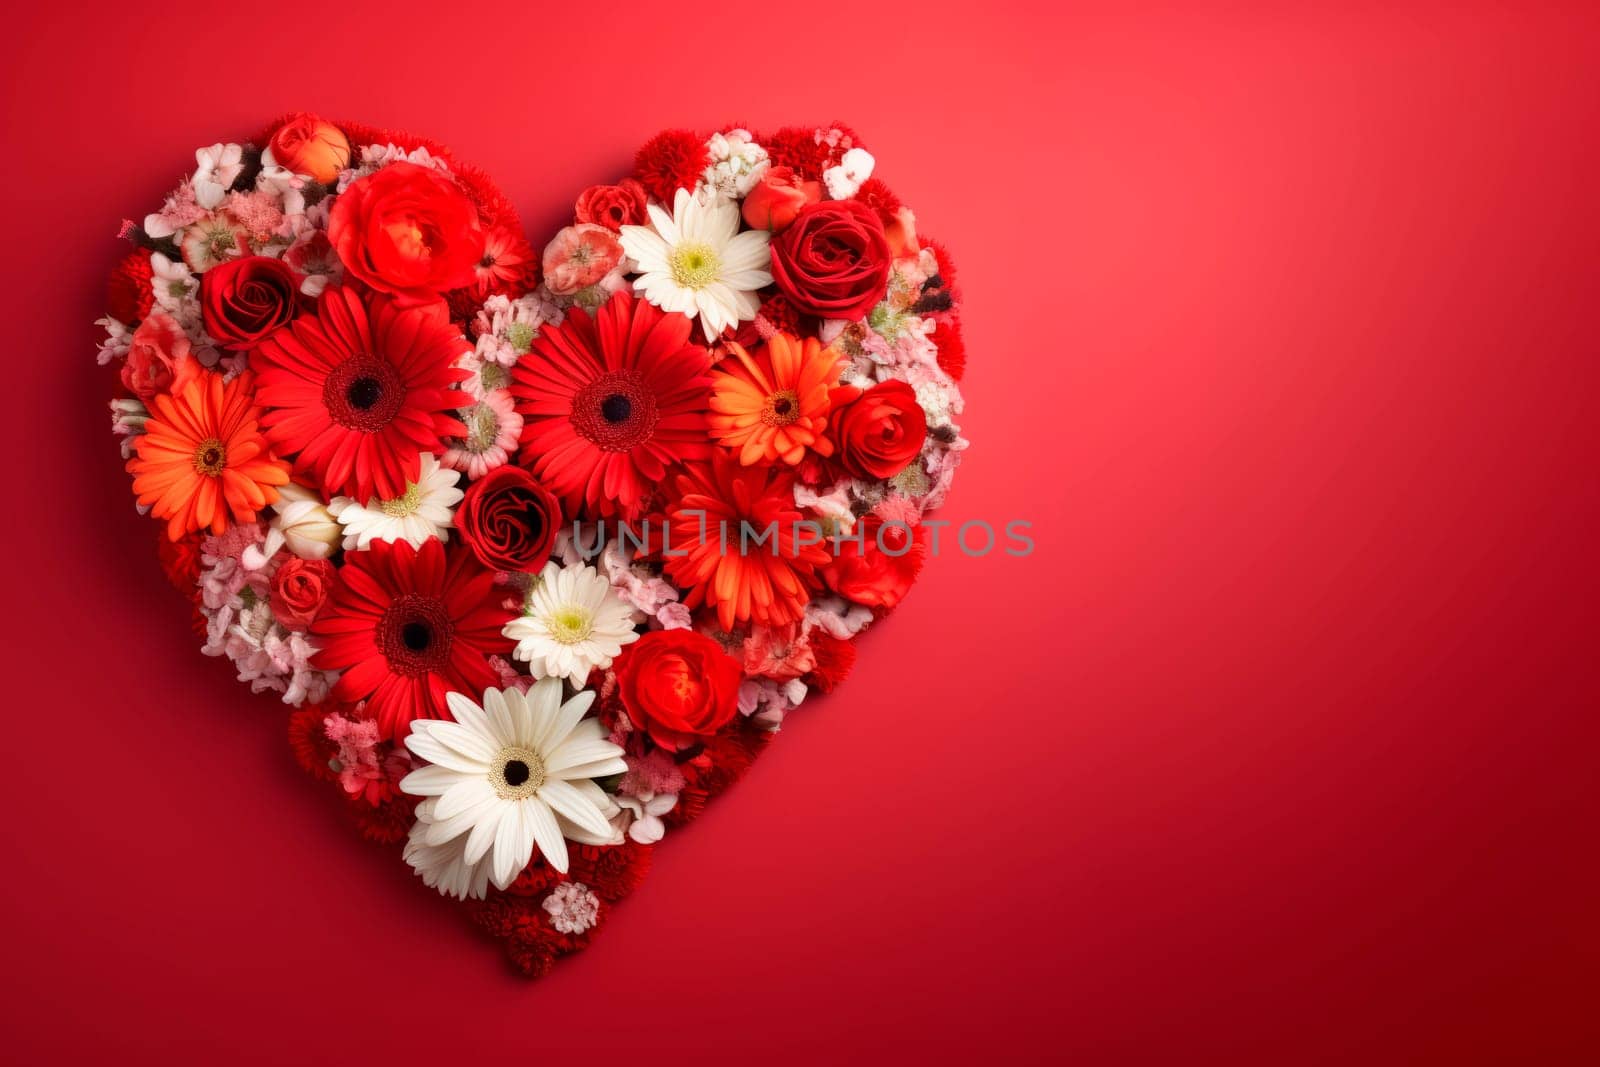 The flowers are laid out in the shape of a heart on a red background. by Spirina